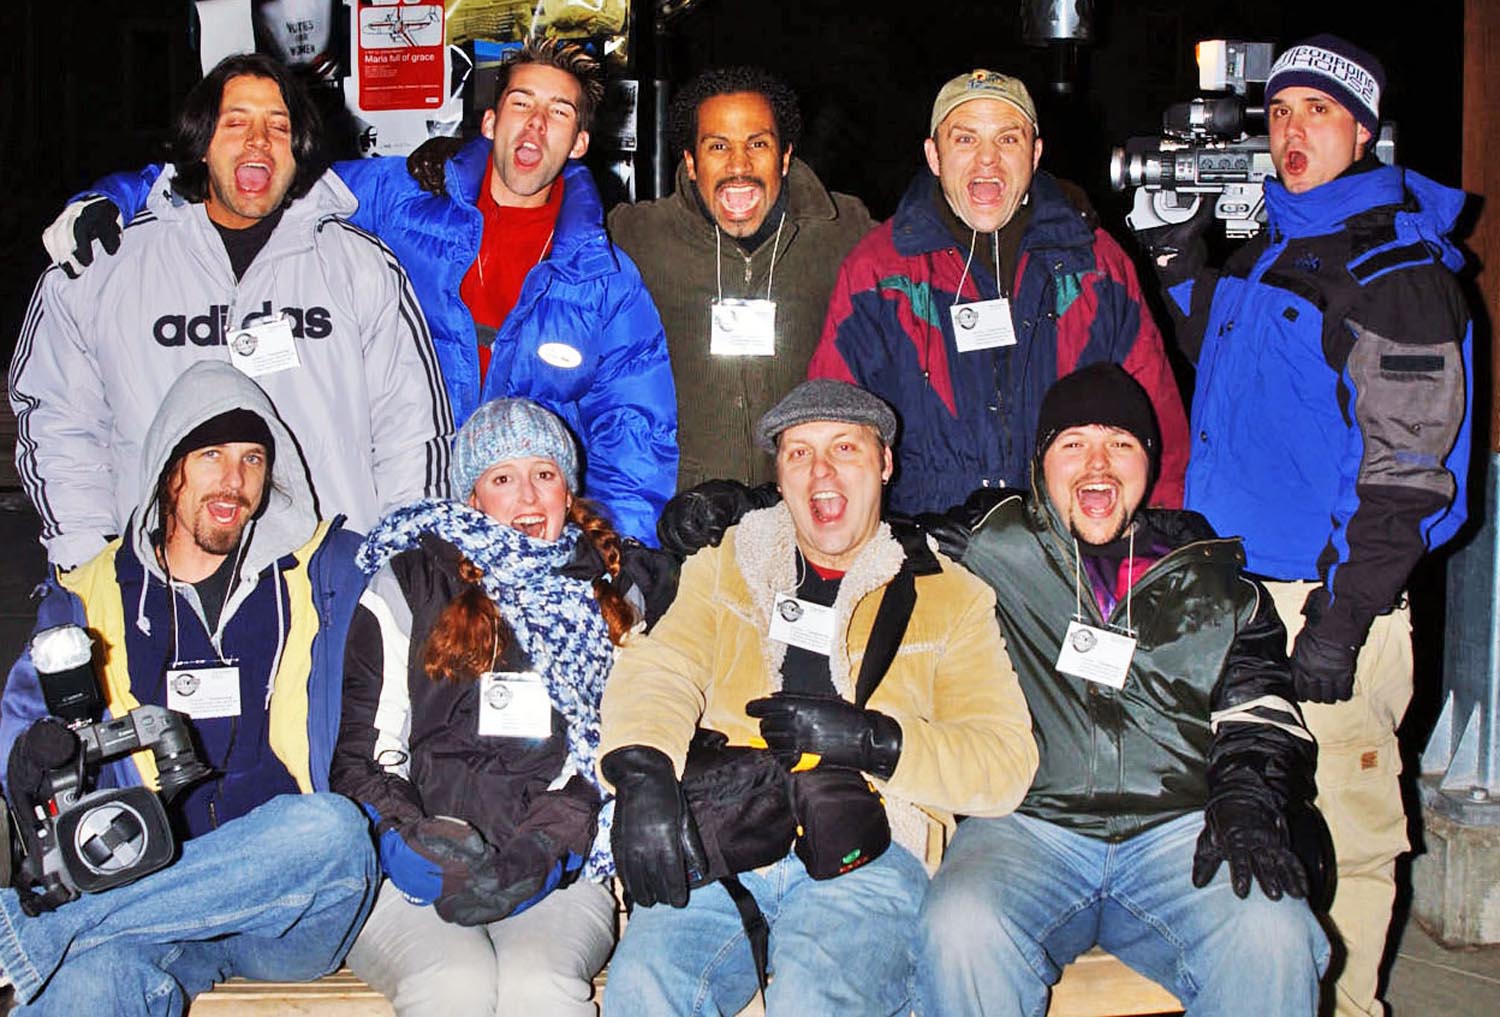 Julian and the entire film crew the first year of filming 'Journey to Sundance'.